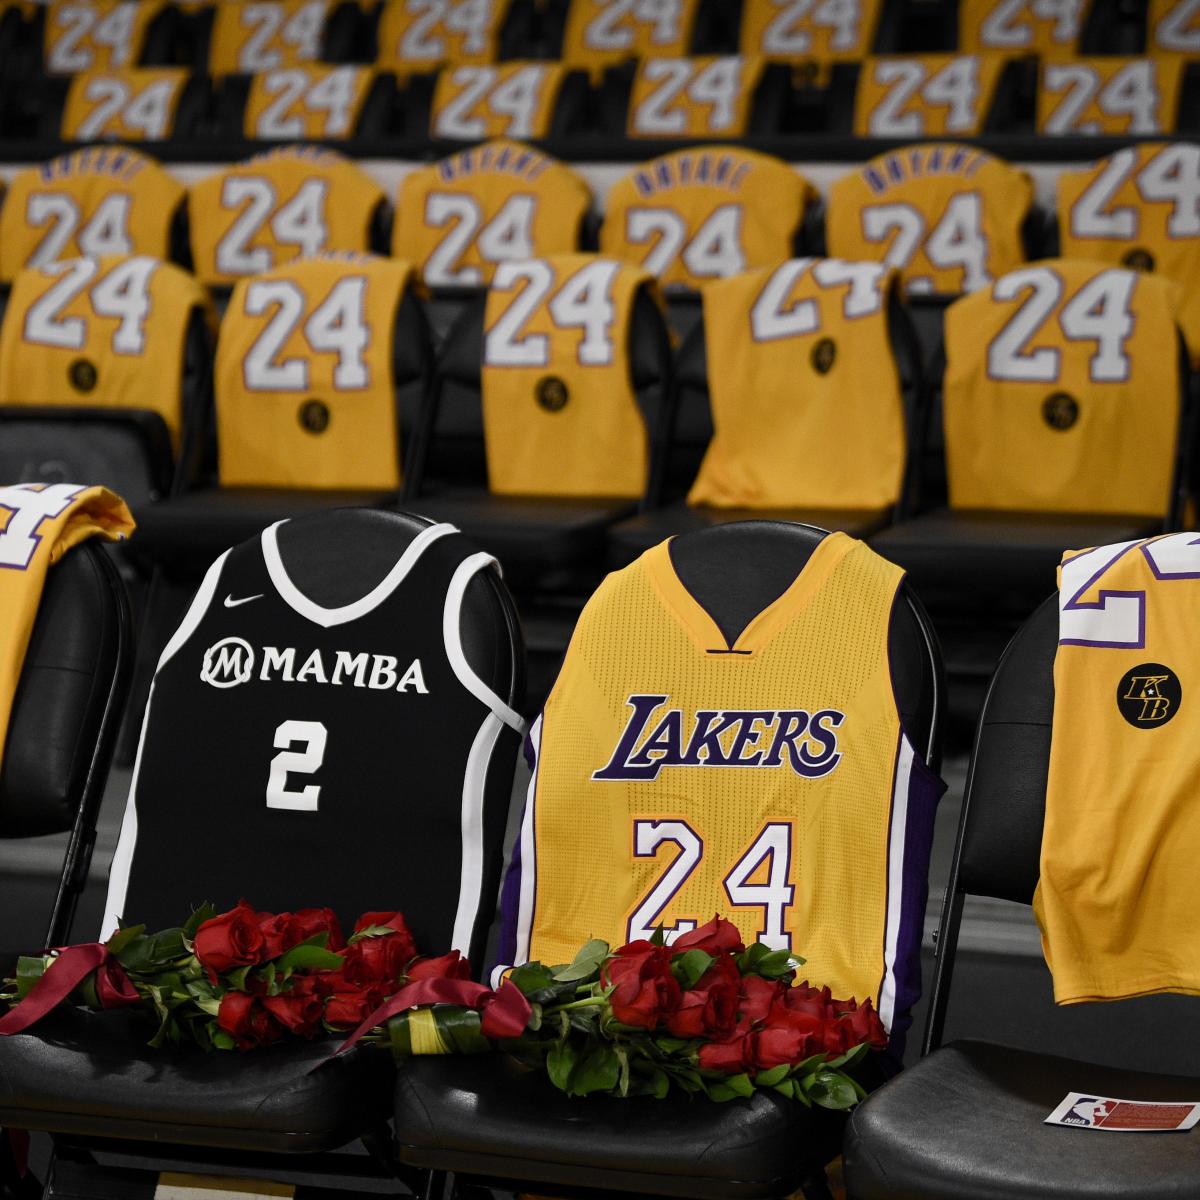 Lakers Retired Kobe Bryant's Jerseys Four Years Ago Today - All